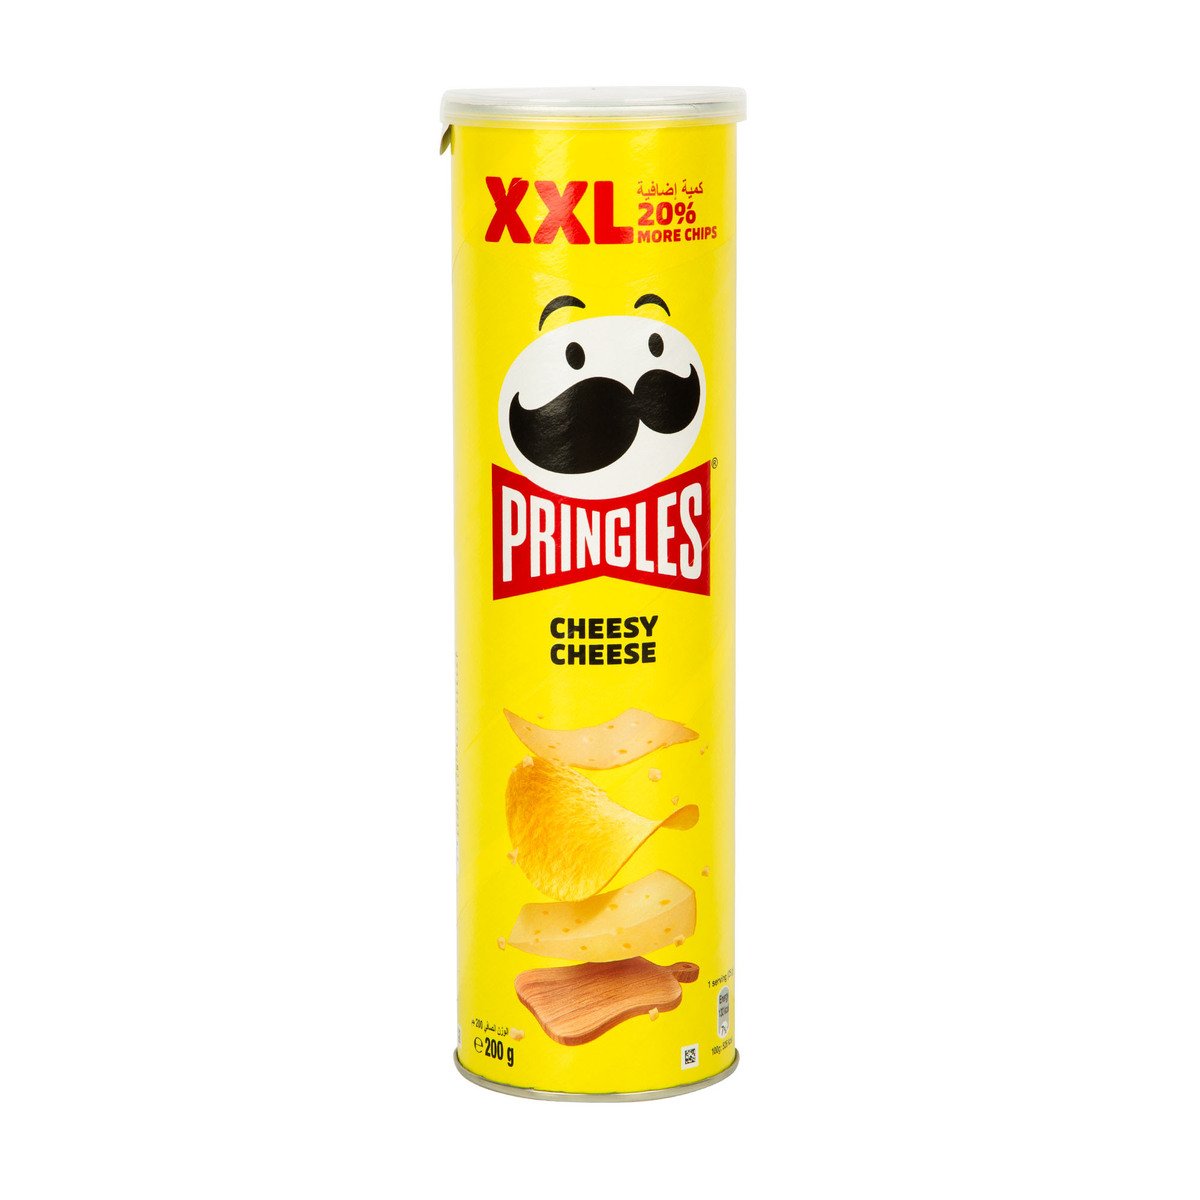 Pringles Xxl Cheesy Cheese Chips 200g Online At Best Price Potato Canister Lulu Oman 9143